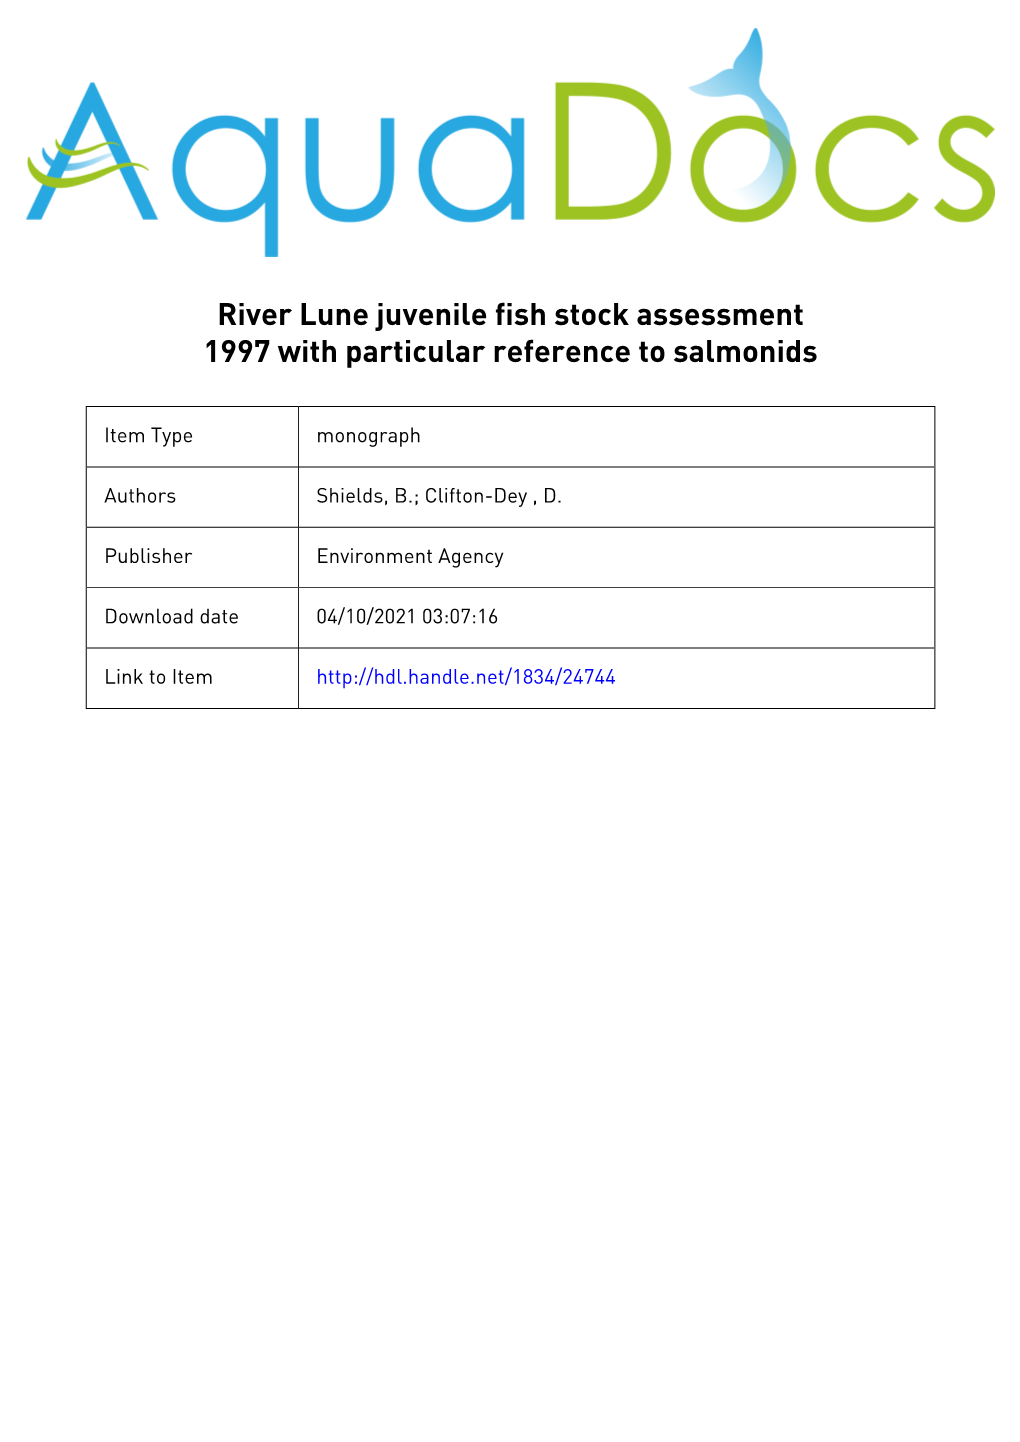 River Lune Juvenile Fish Stock Assessment 1997 with Particular Reference to Salmonids